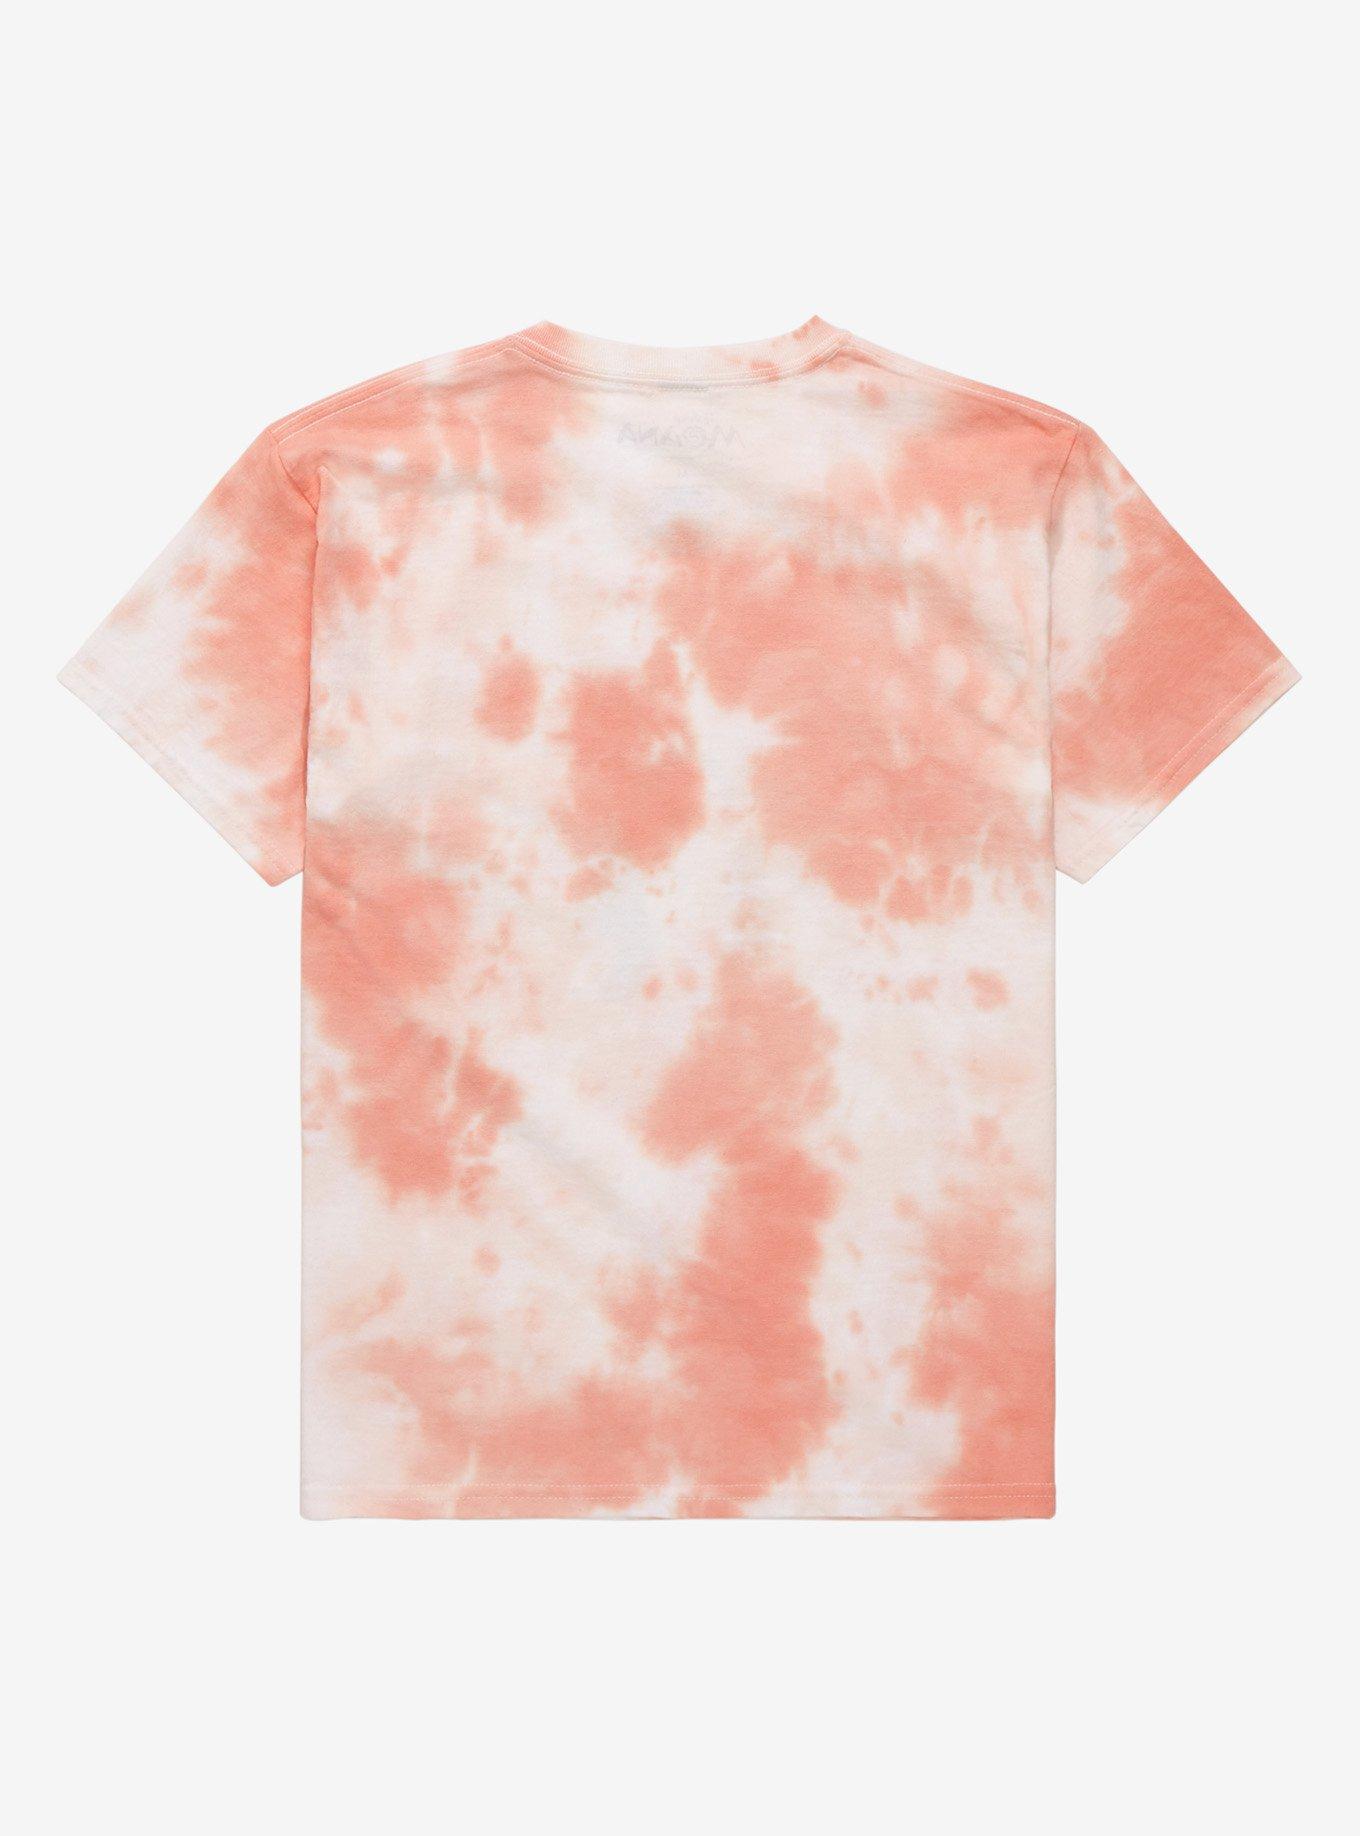 Graphic Tees & T-Shirts | BoxLunch